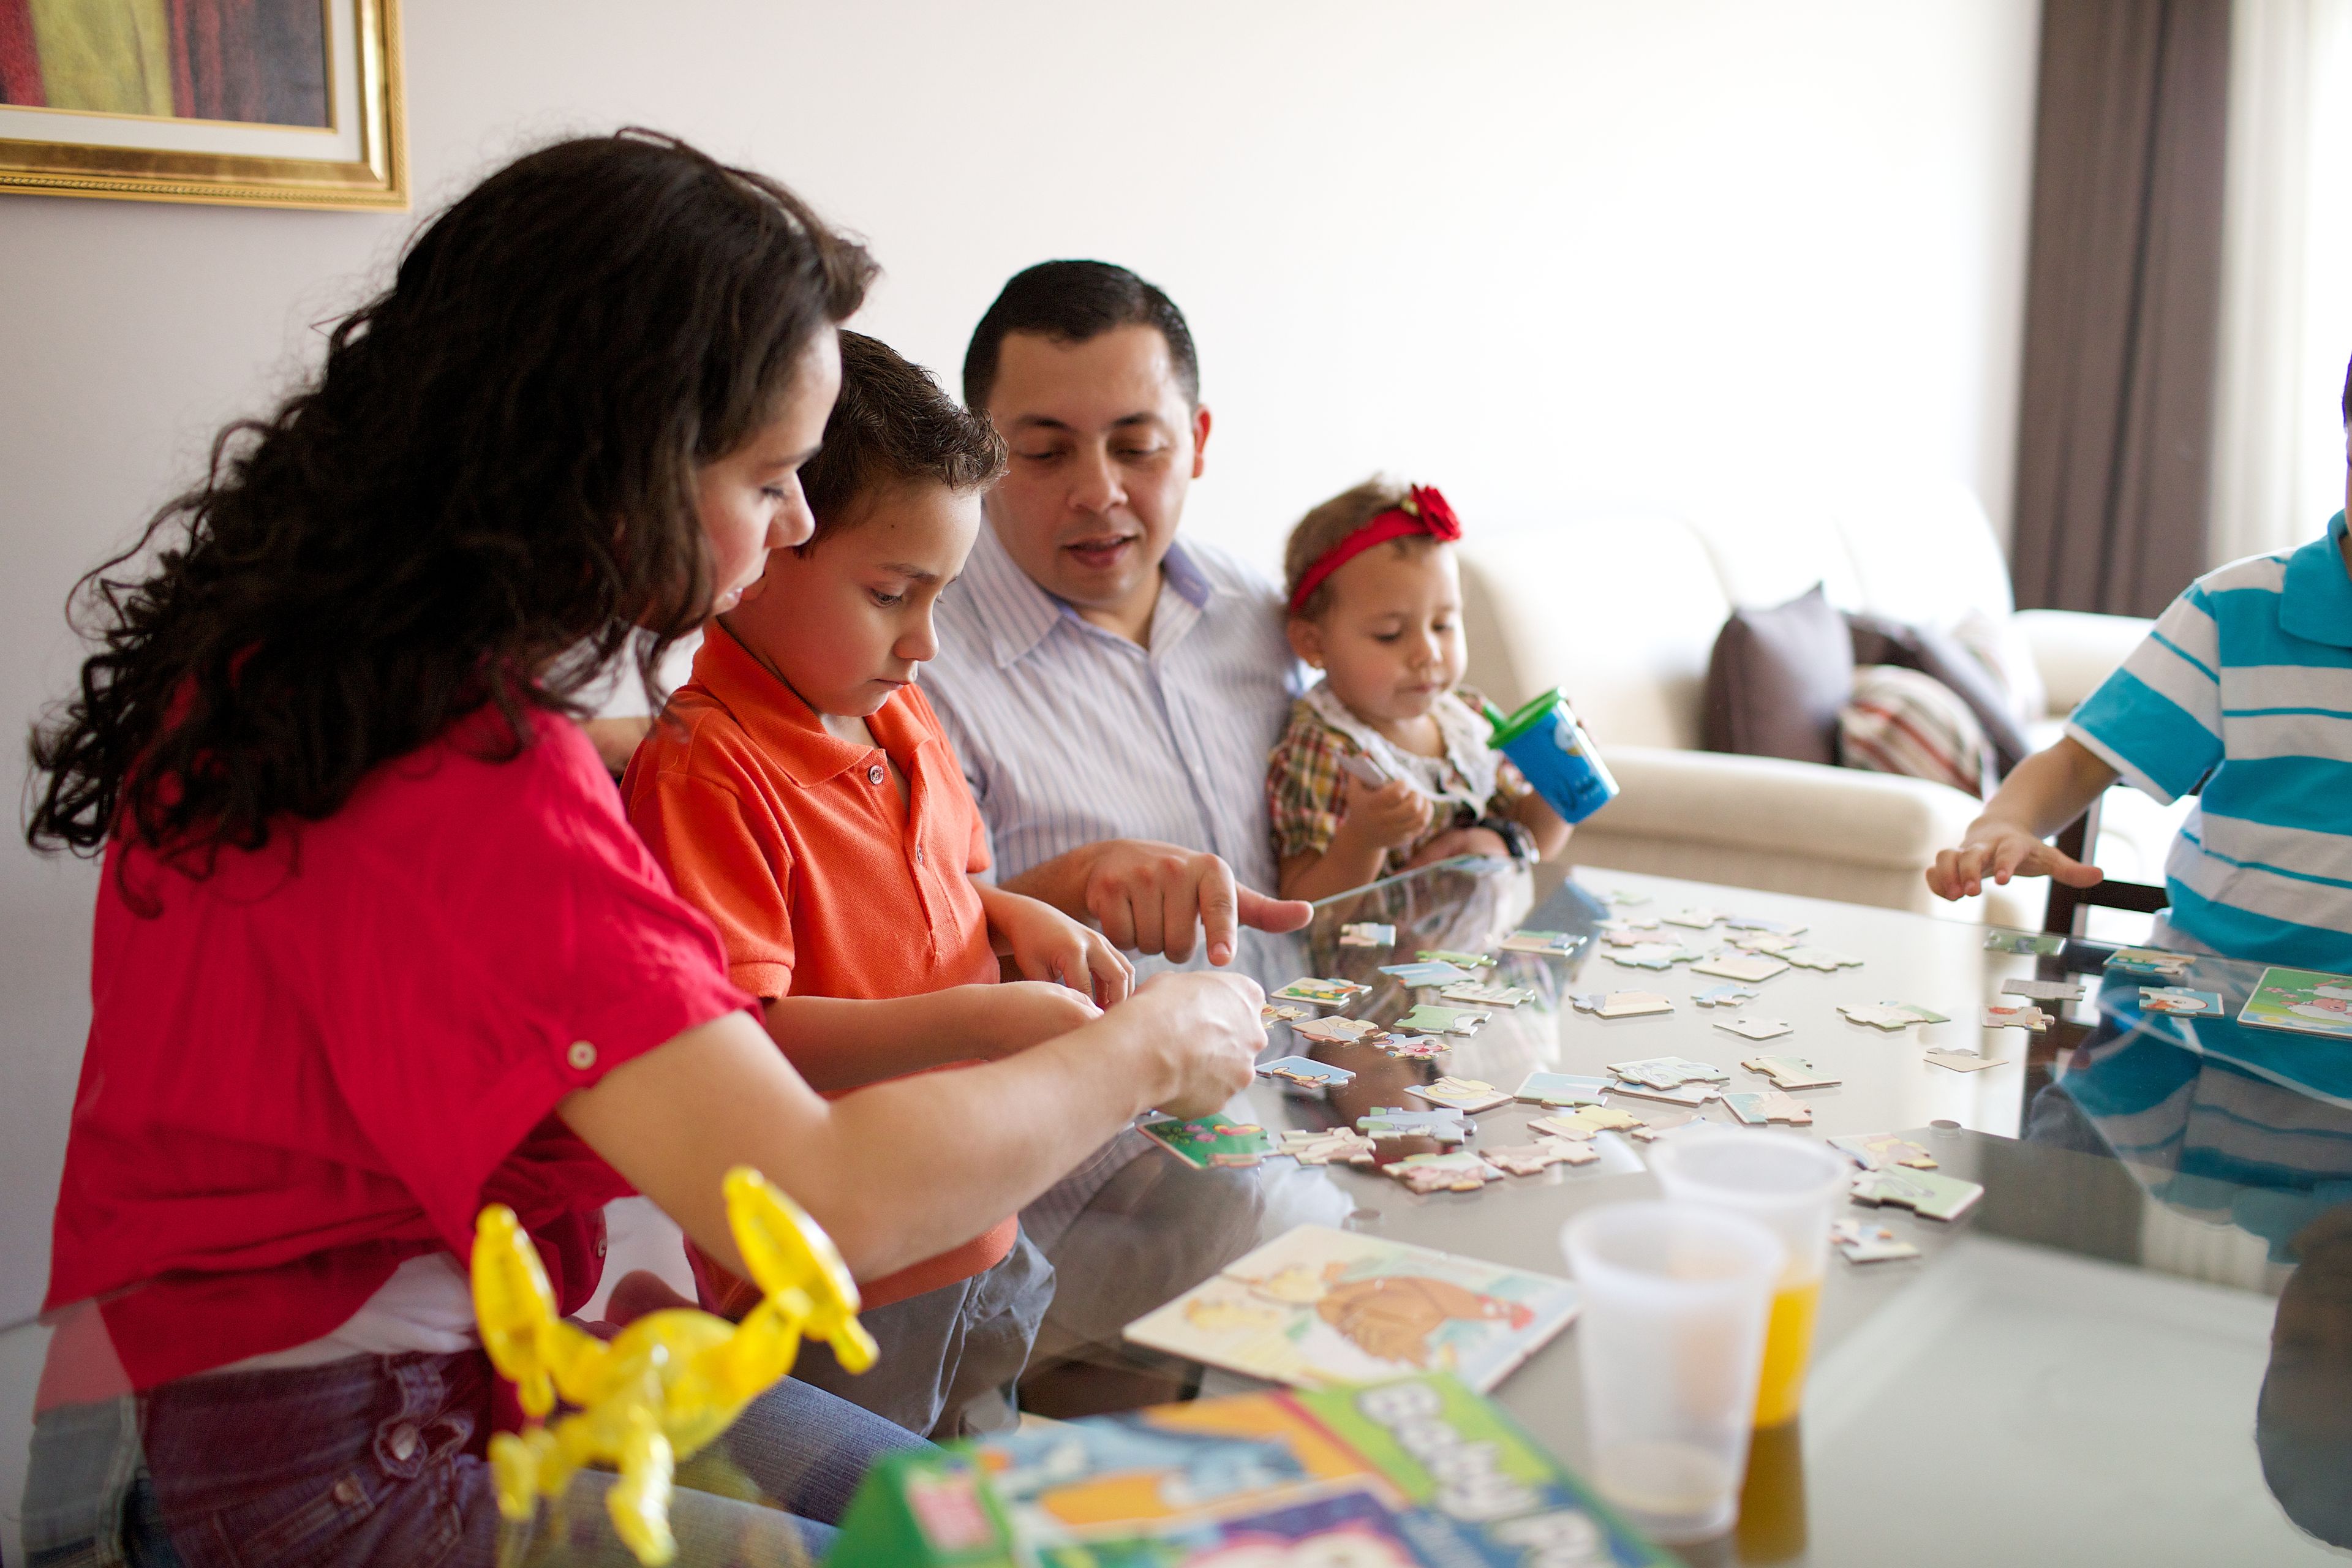 A family sits together at a table in their home and builds a puzzle.  